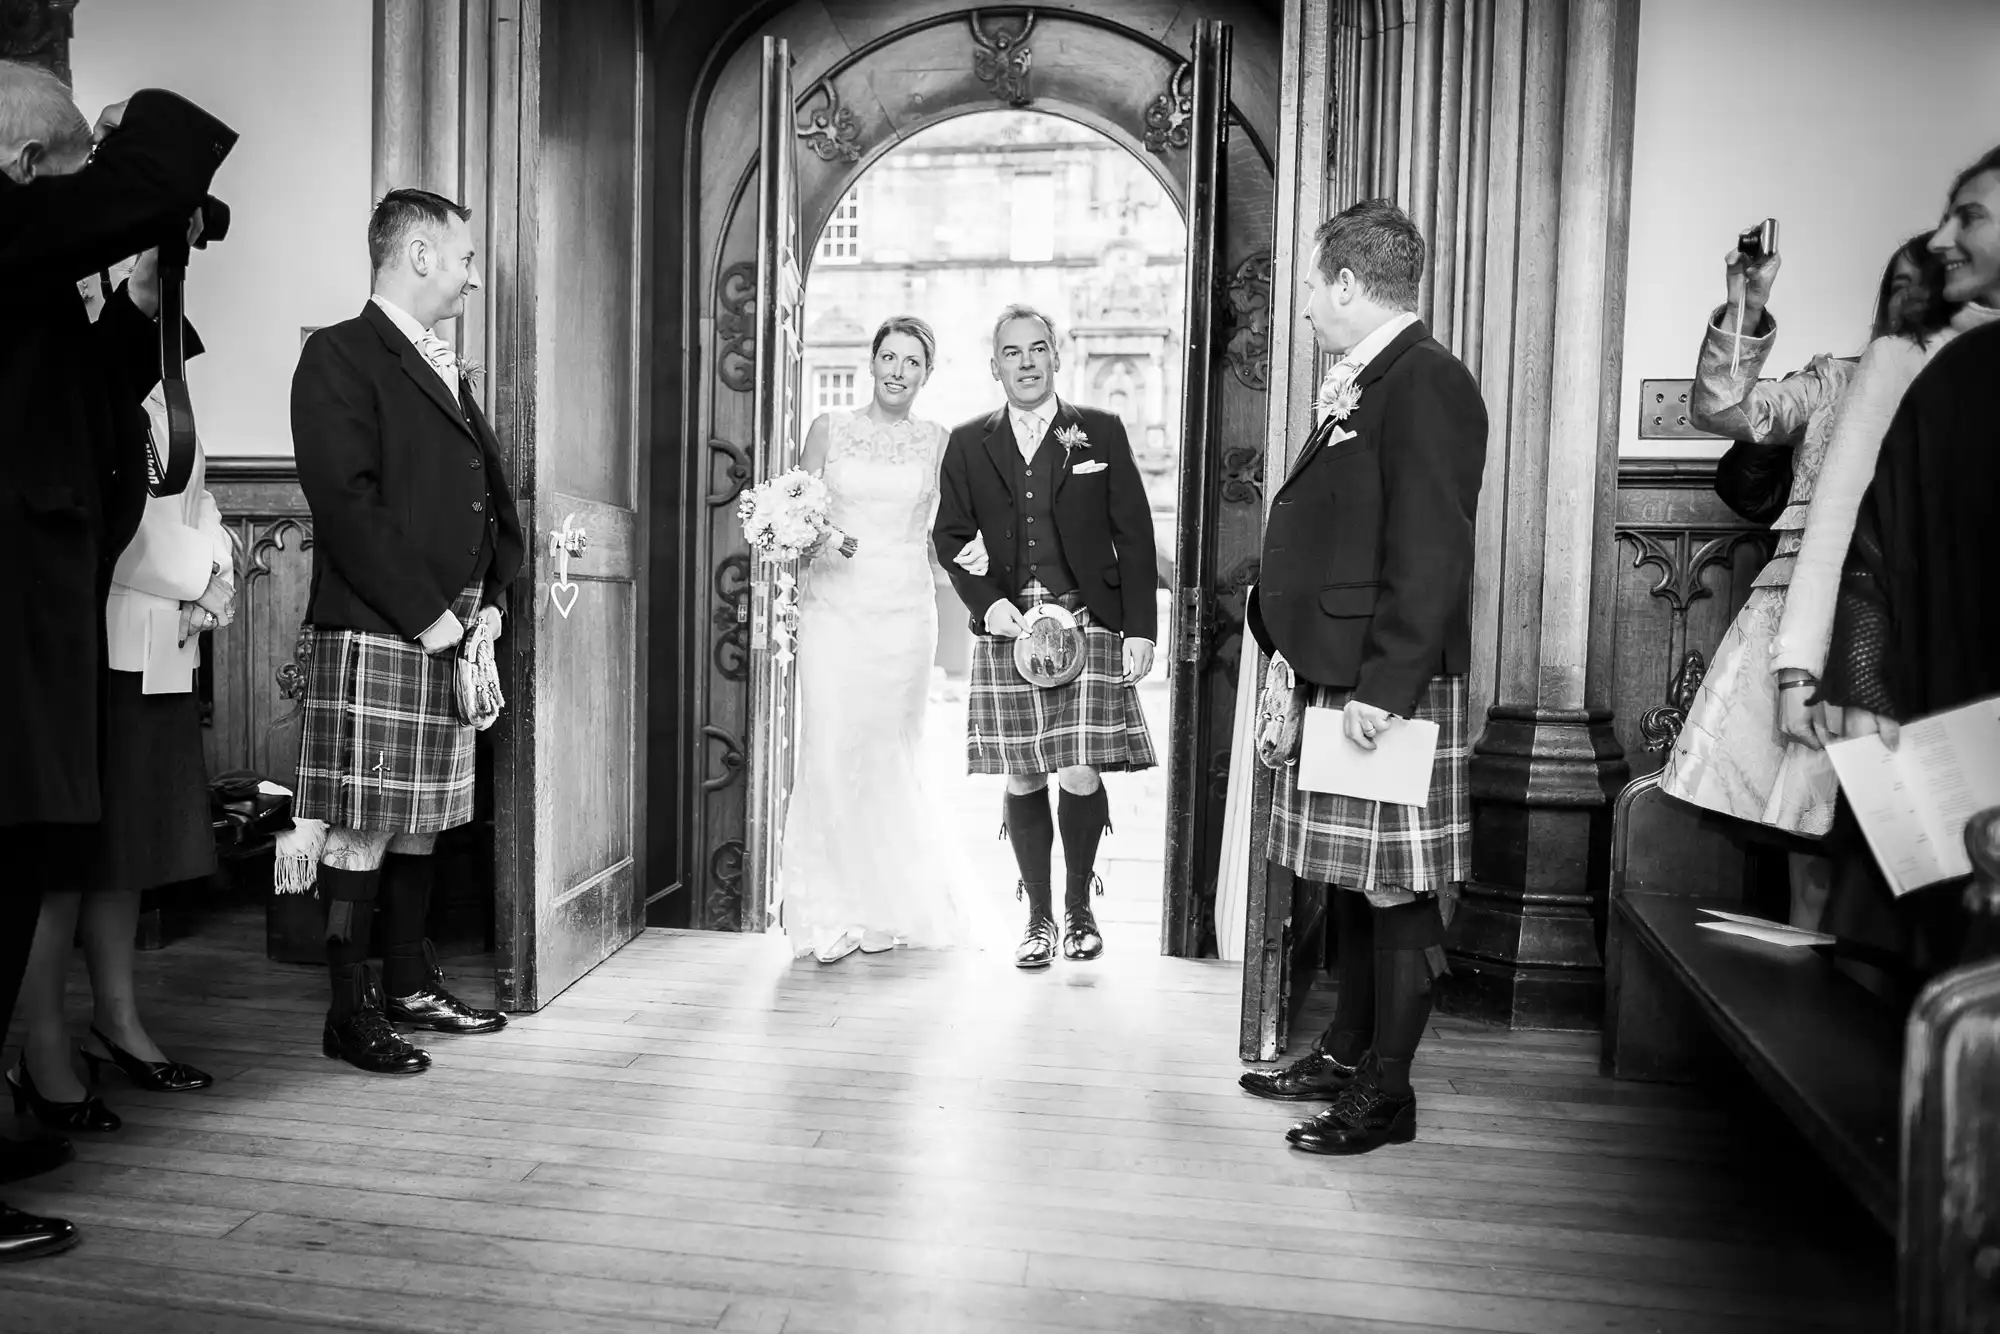 A bride and groom walk through a doorway smiling, surrounded by guests in kilts, at a traditional scottish wedding.